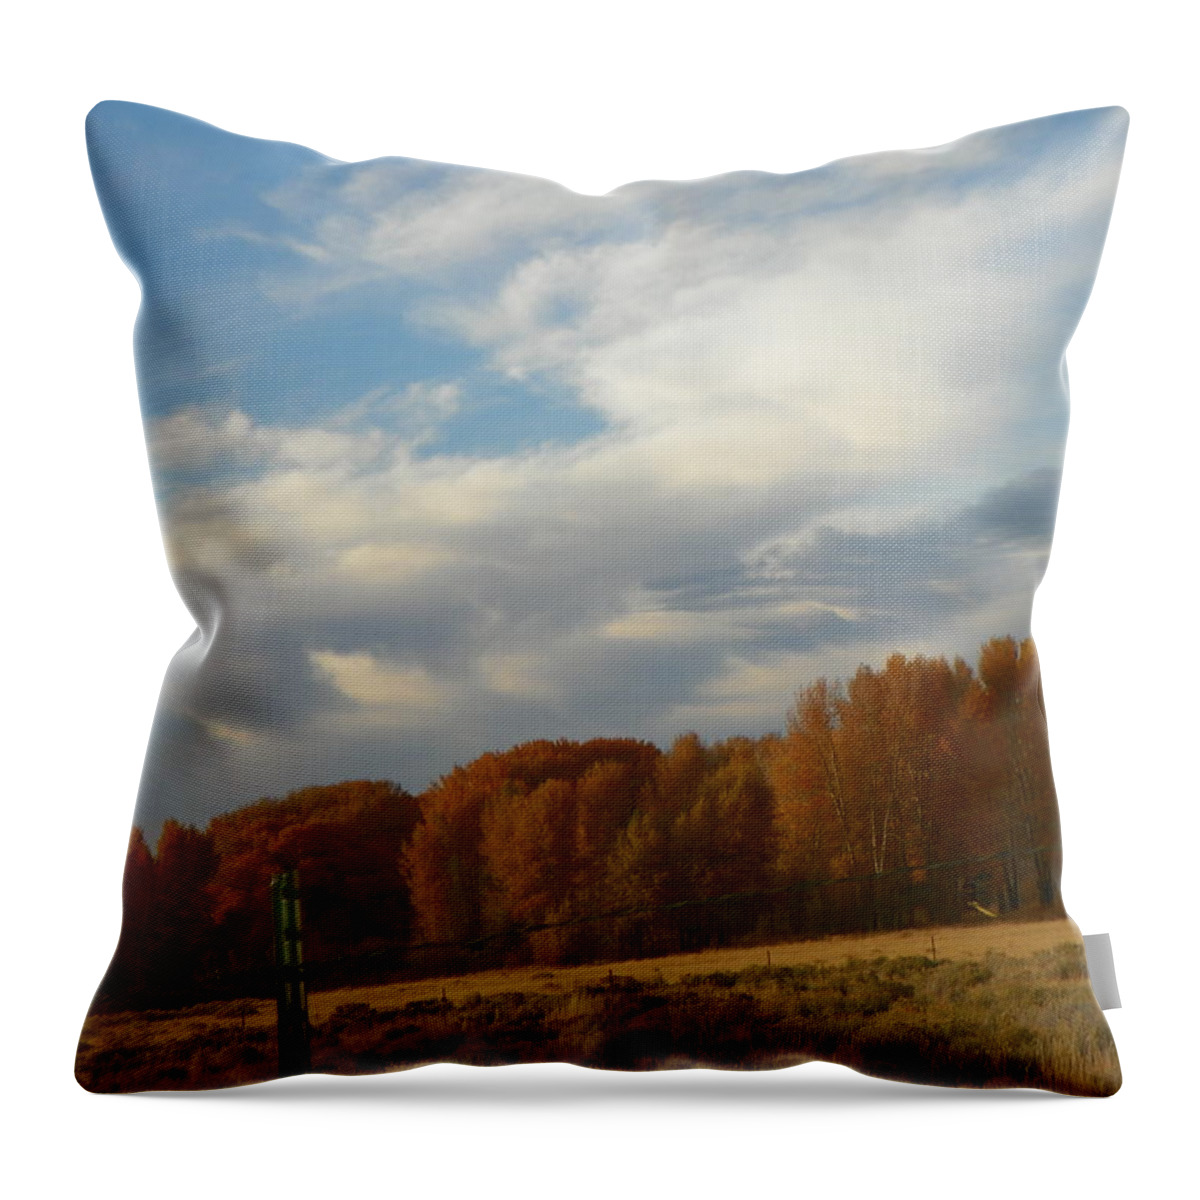 Expressive Throw Pillow featuring the photograph As It Is by Lenore Senior